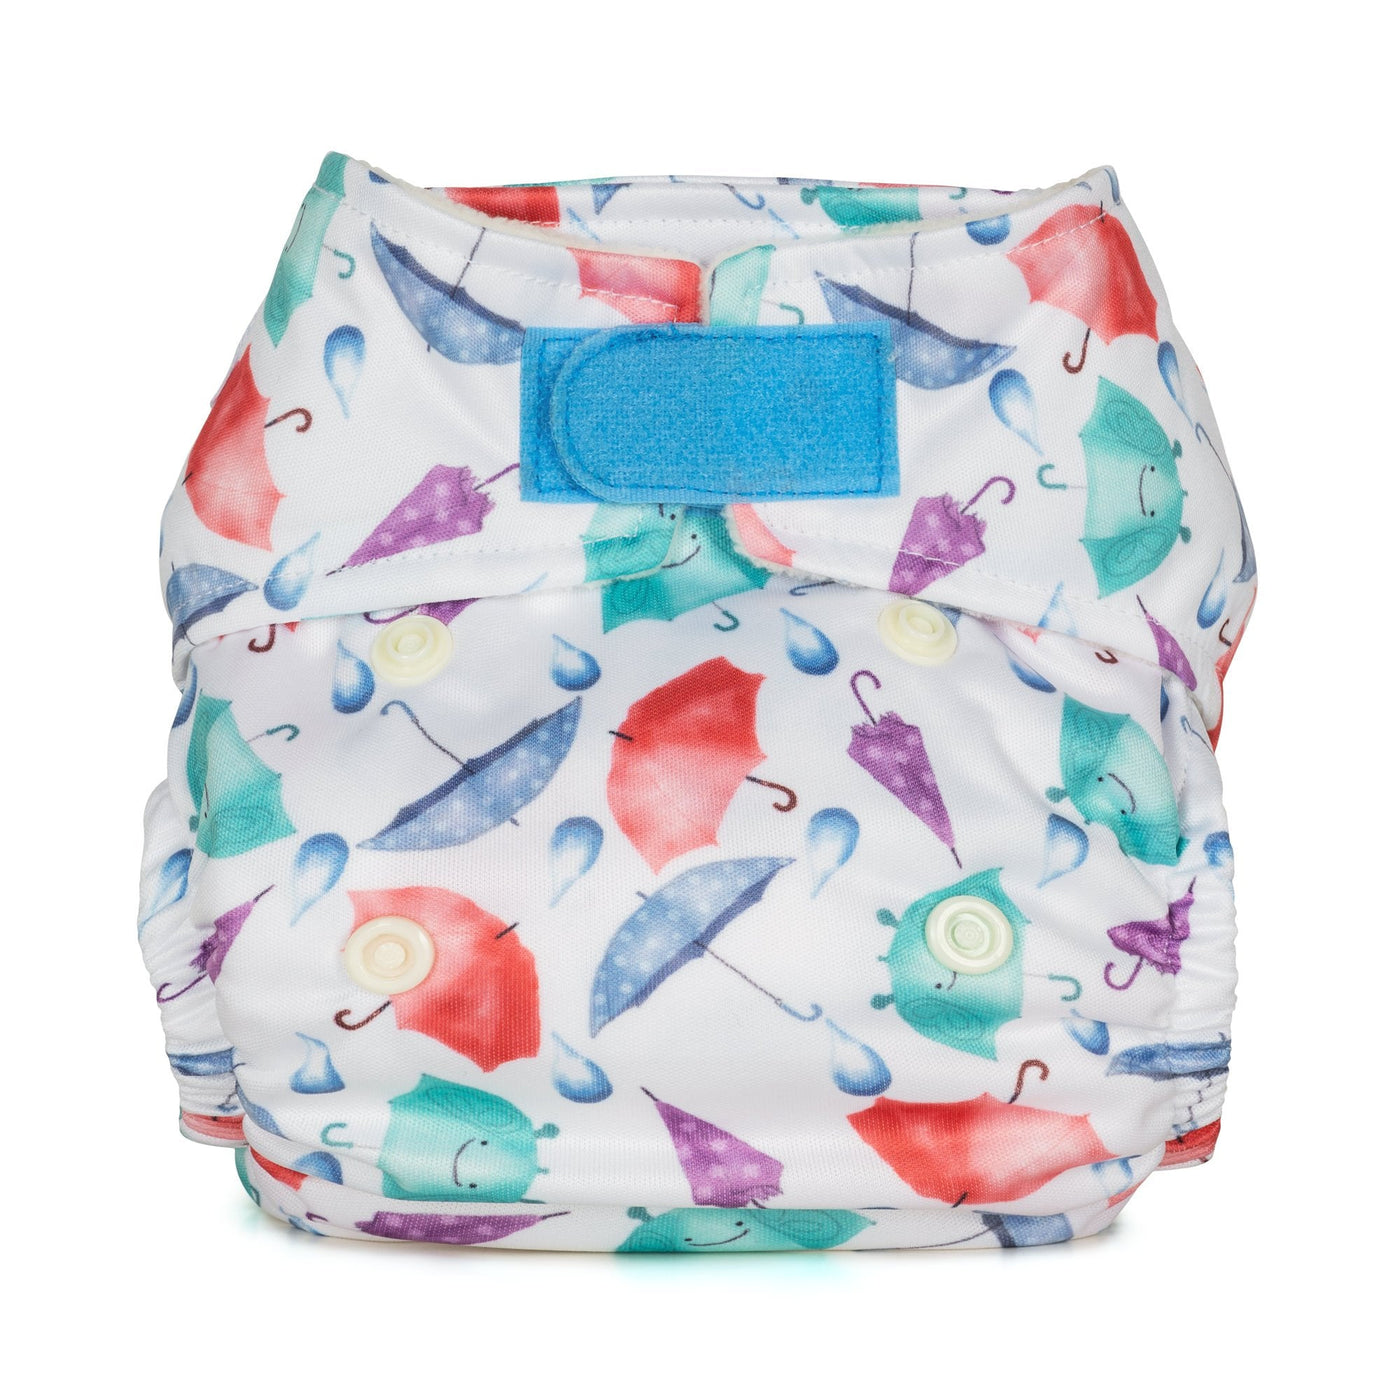 Baba + Boo| Newborn Reusable Nappy - Prints | Earthlets.com |  | reusable nappies all in one nappies